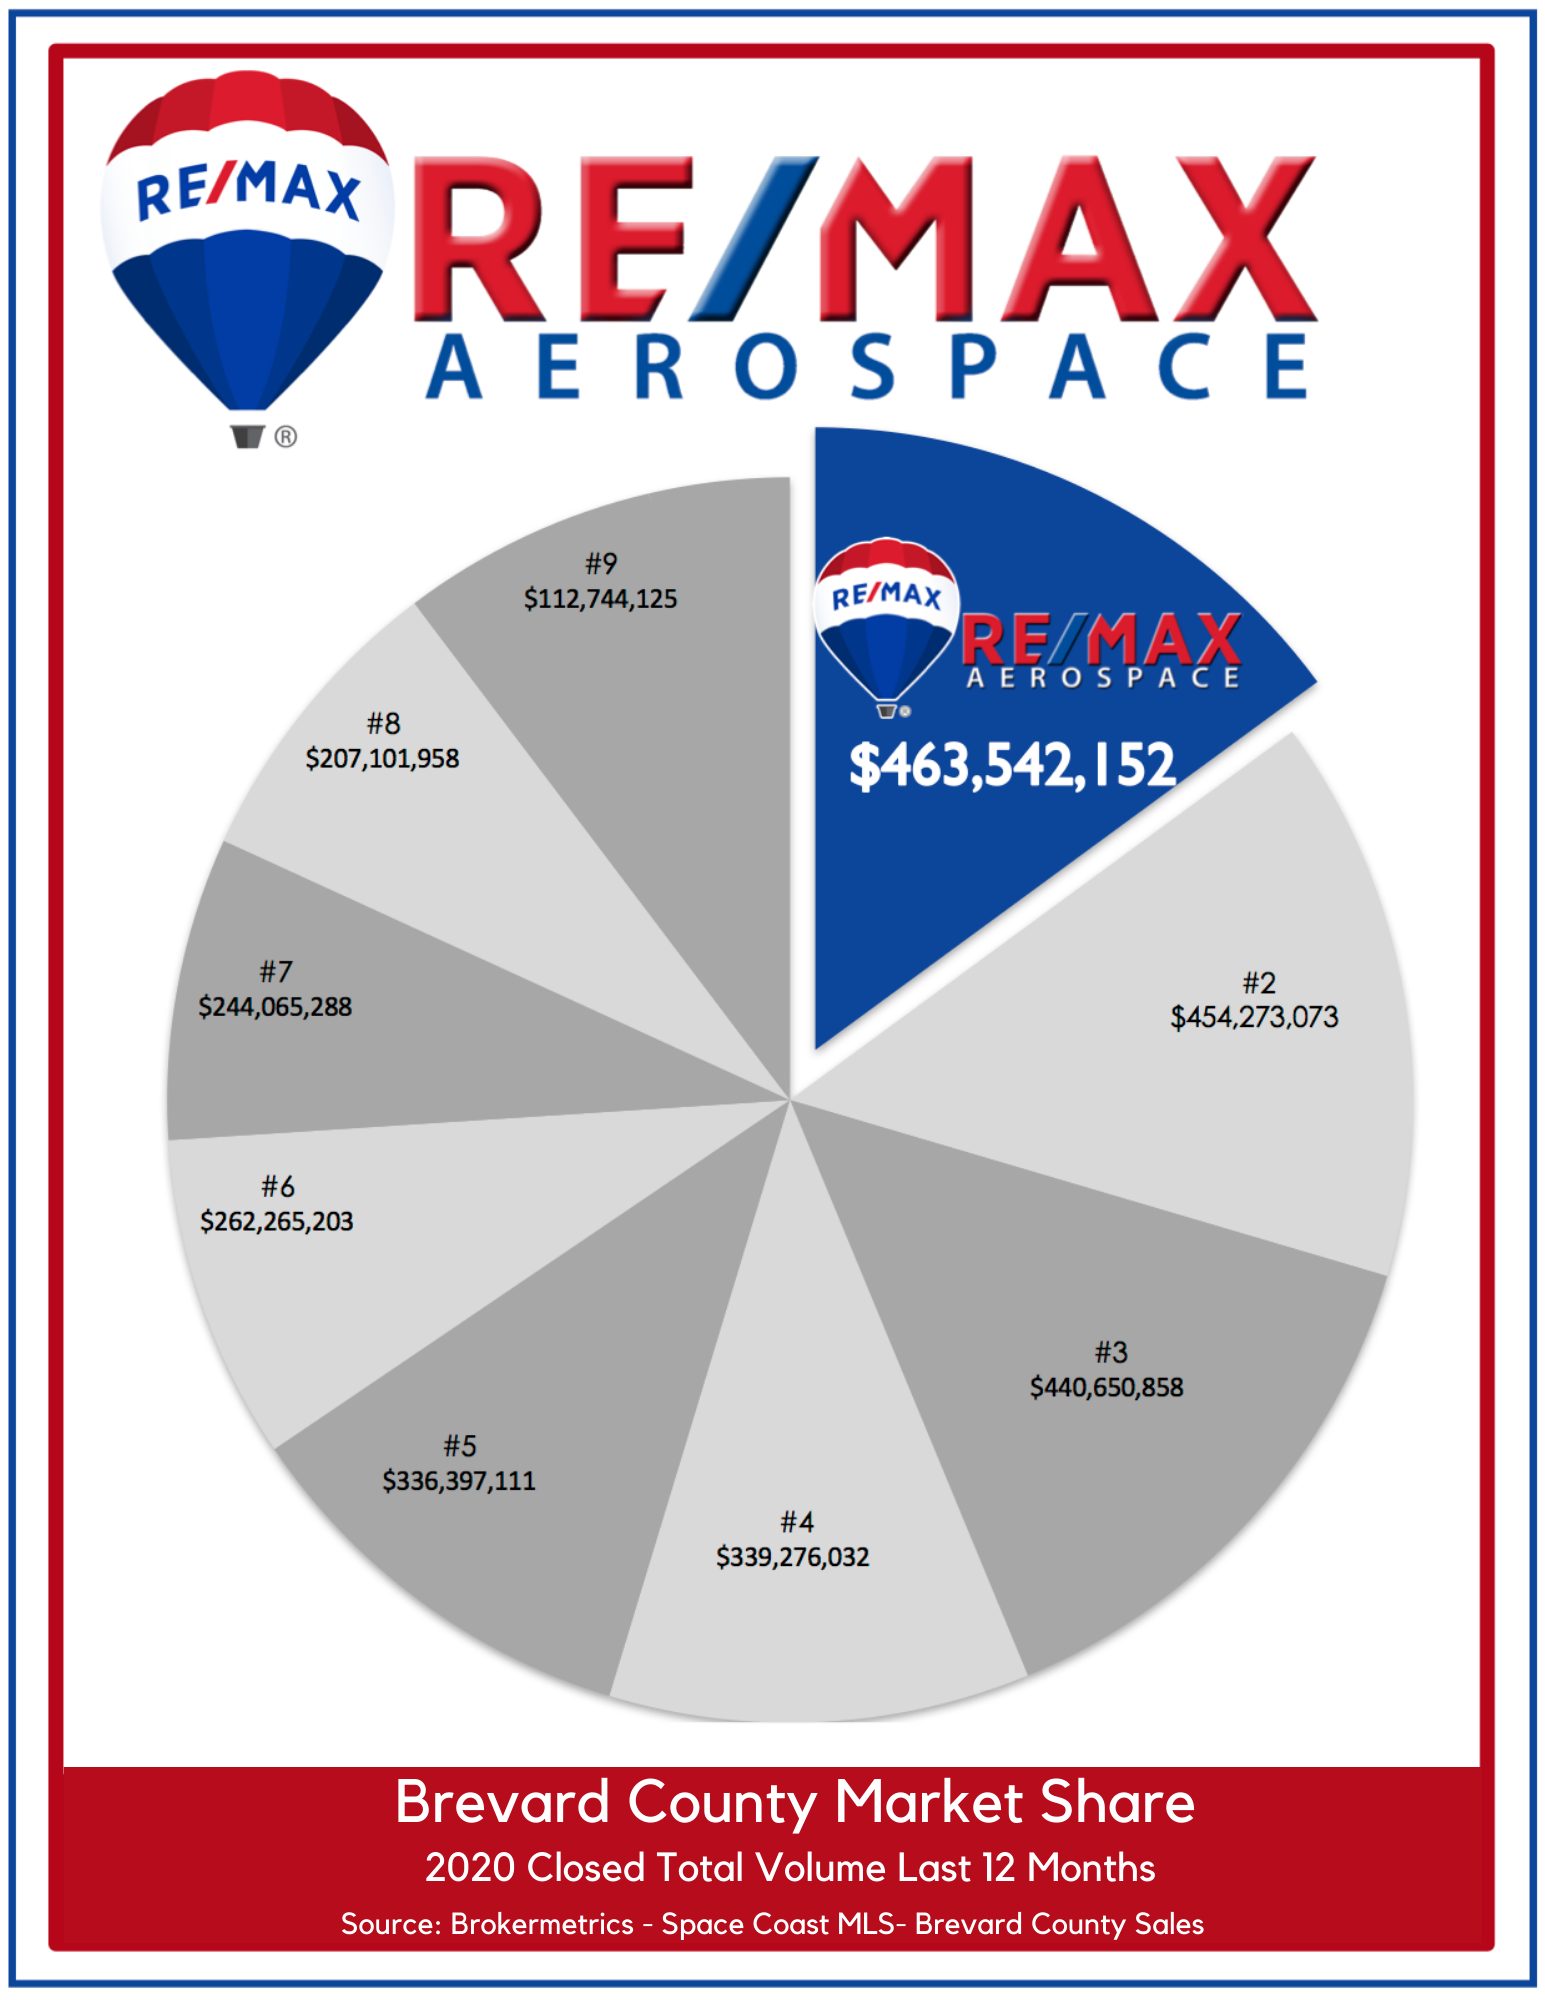 Pie chart showing RE/MAX Aerospace has the greatest market share in Brevard County